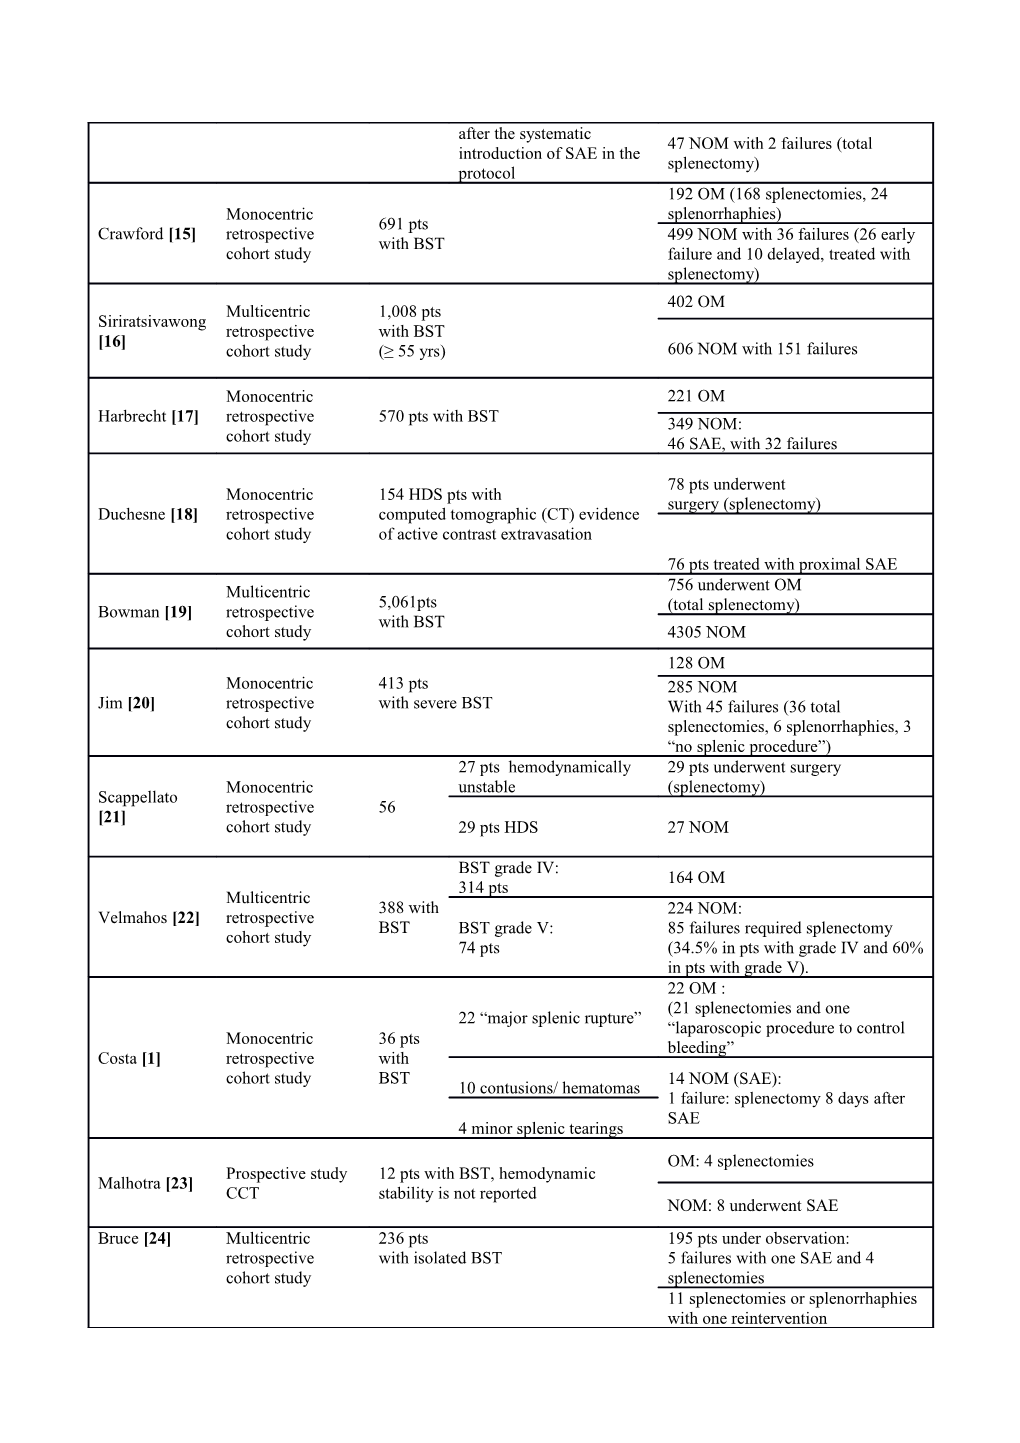 Table 1: Characteristics of the Included Studies